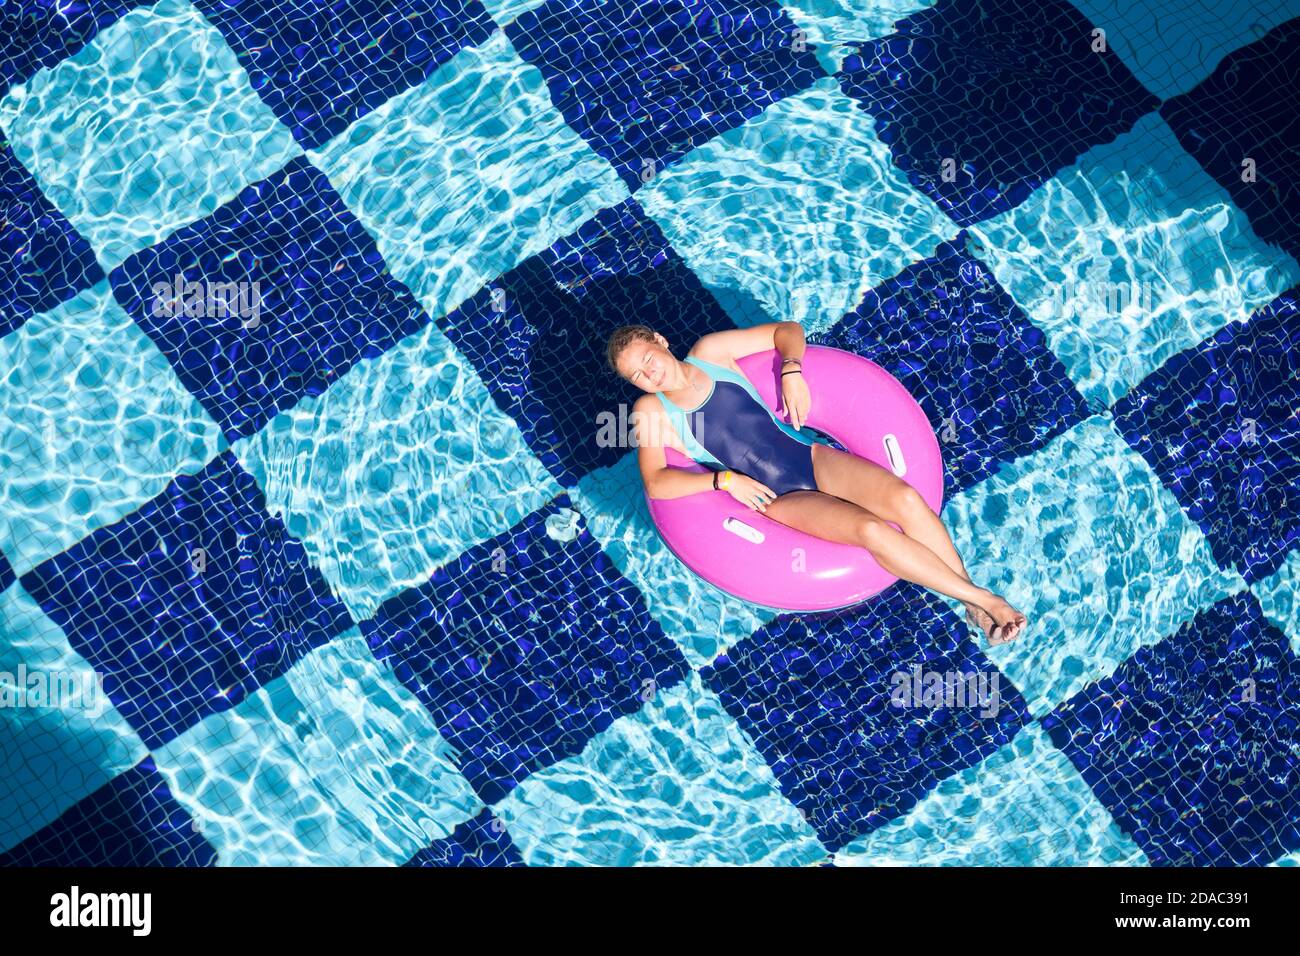 Teenage girl swimming in pool with inflatable ring, top view Stock Photo